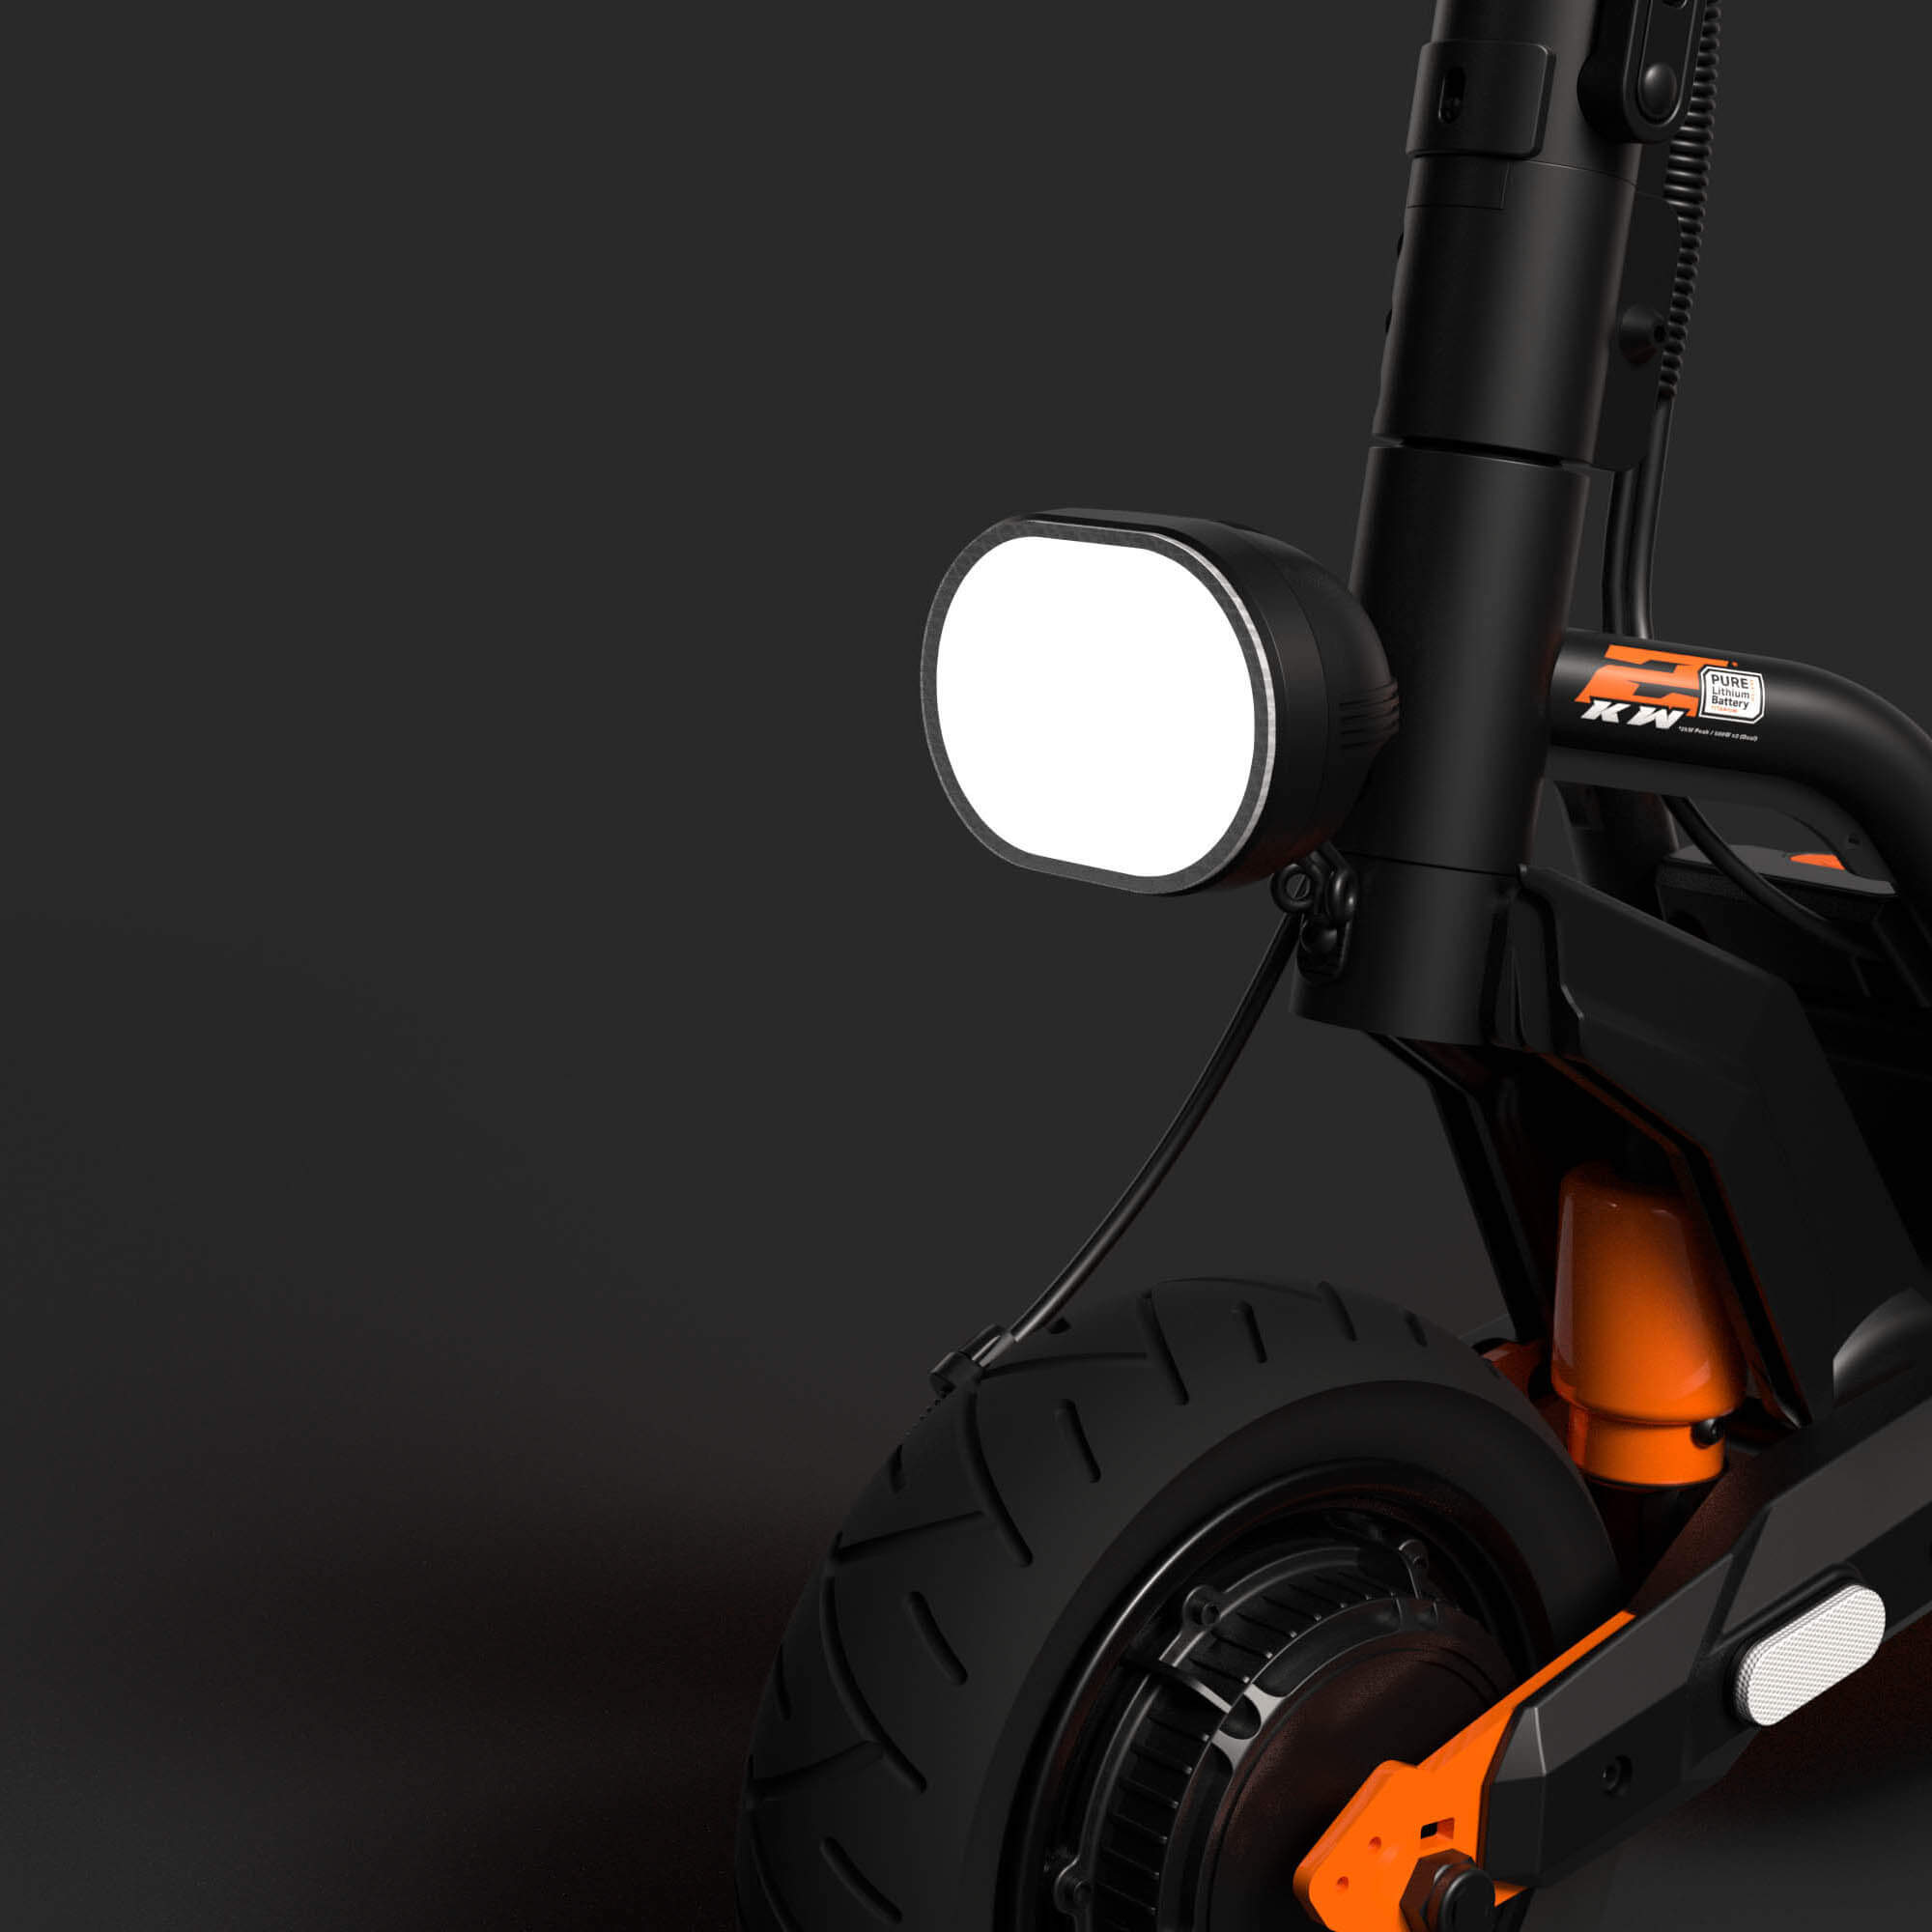 techtron TS10+ VOX - 2 kW* Electric Scooter - Dual System Hydraulic techtron